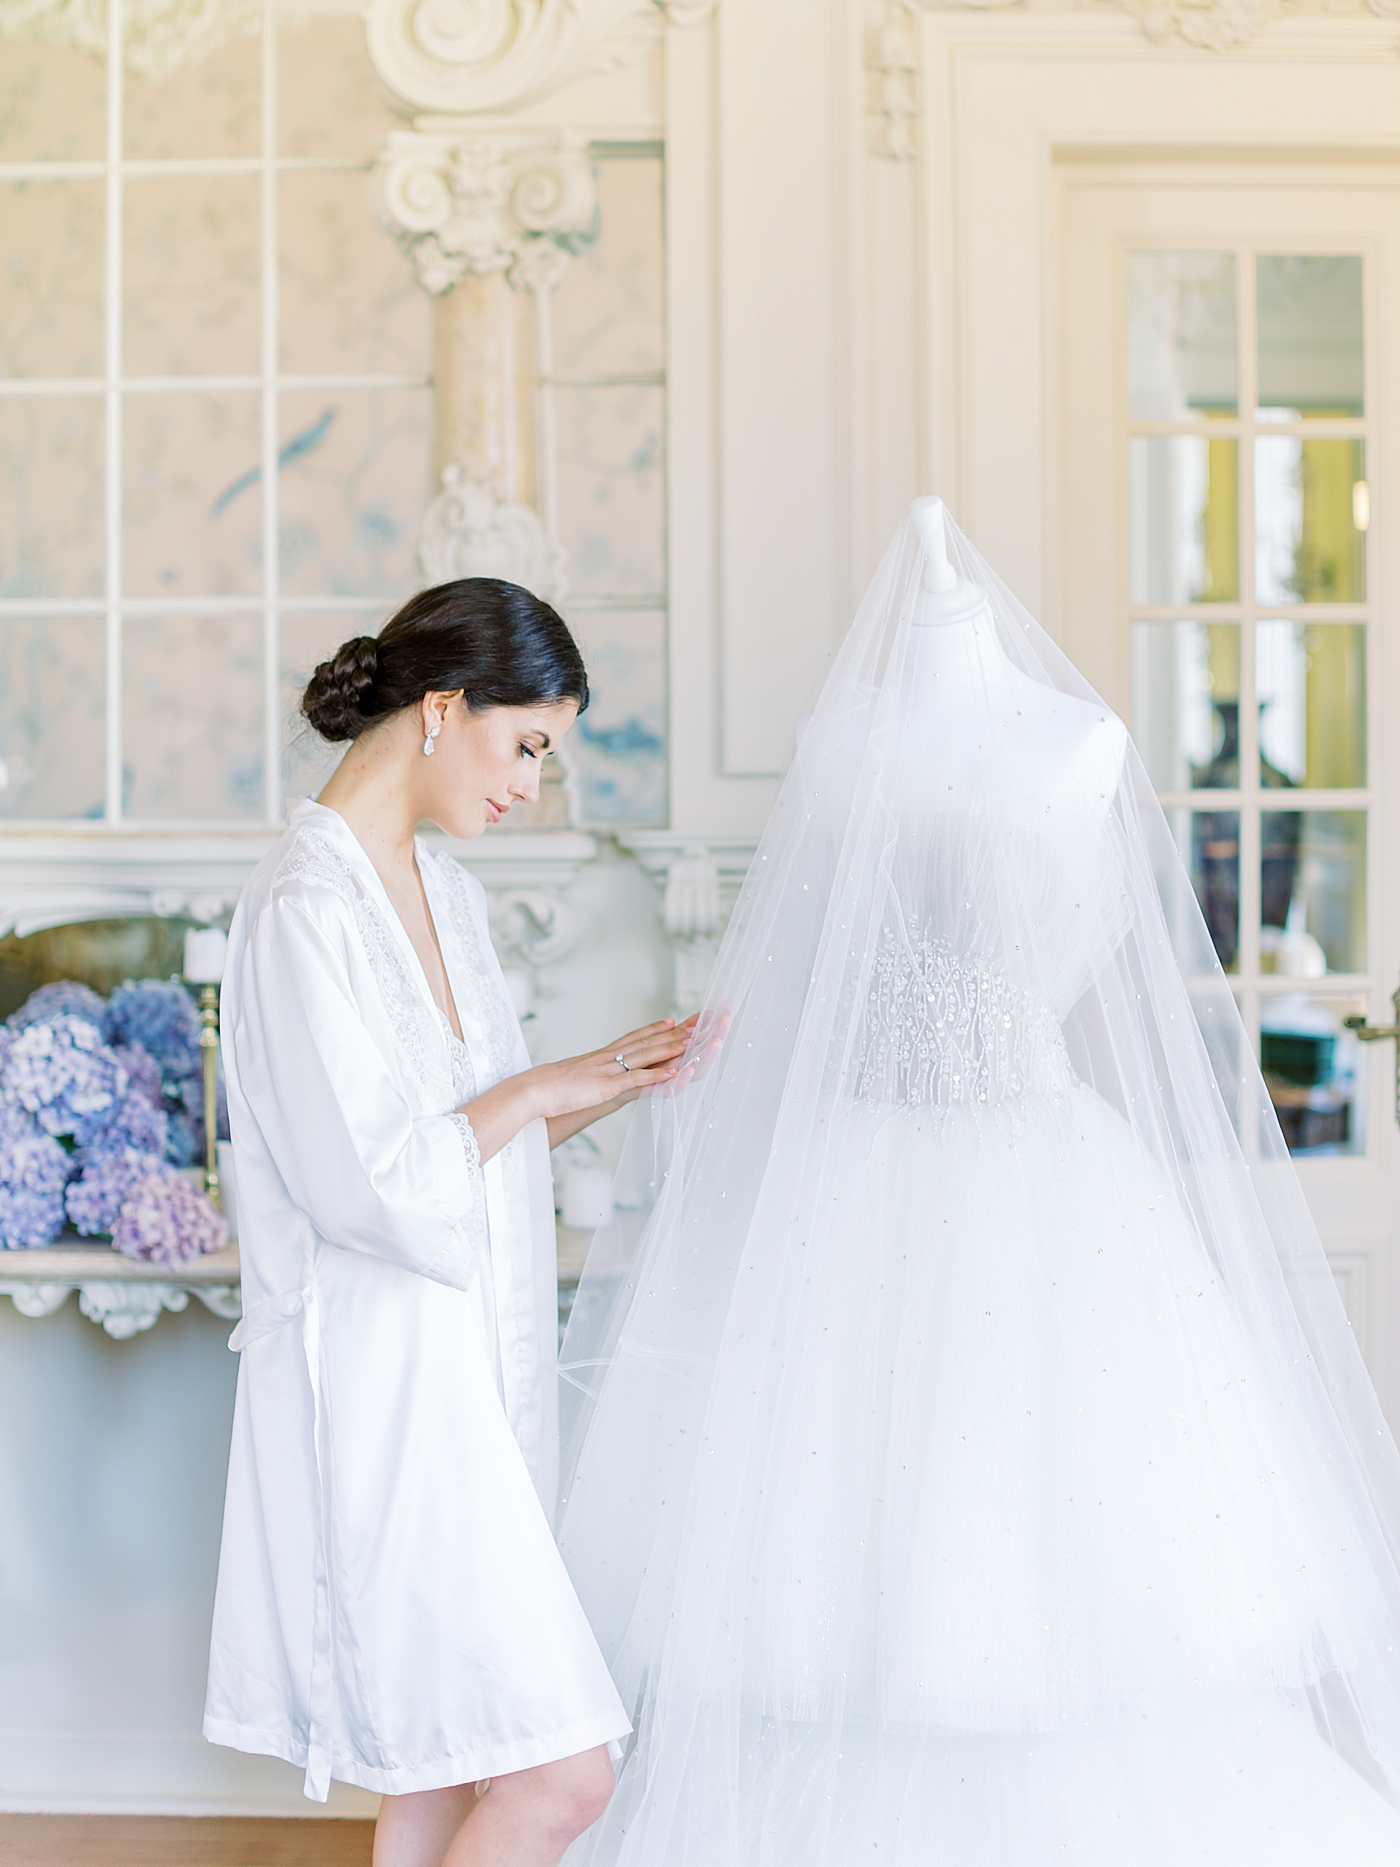 Bride in a white robe admiring her veil | Image by Diane Sotero 